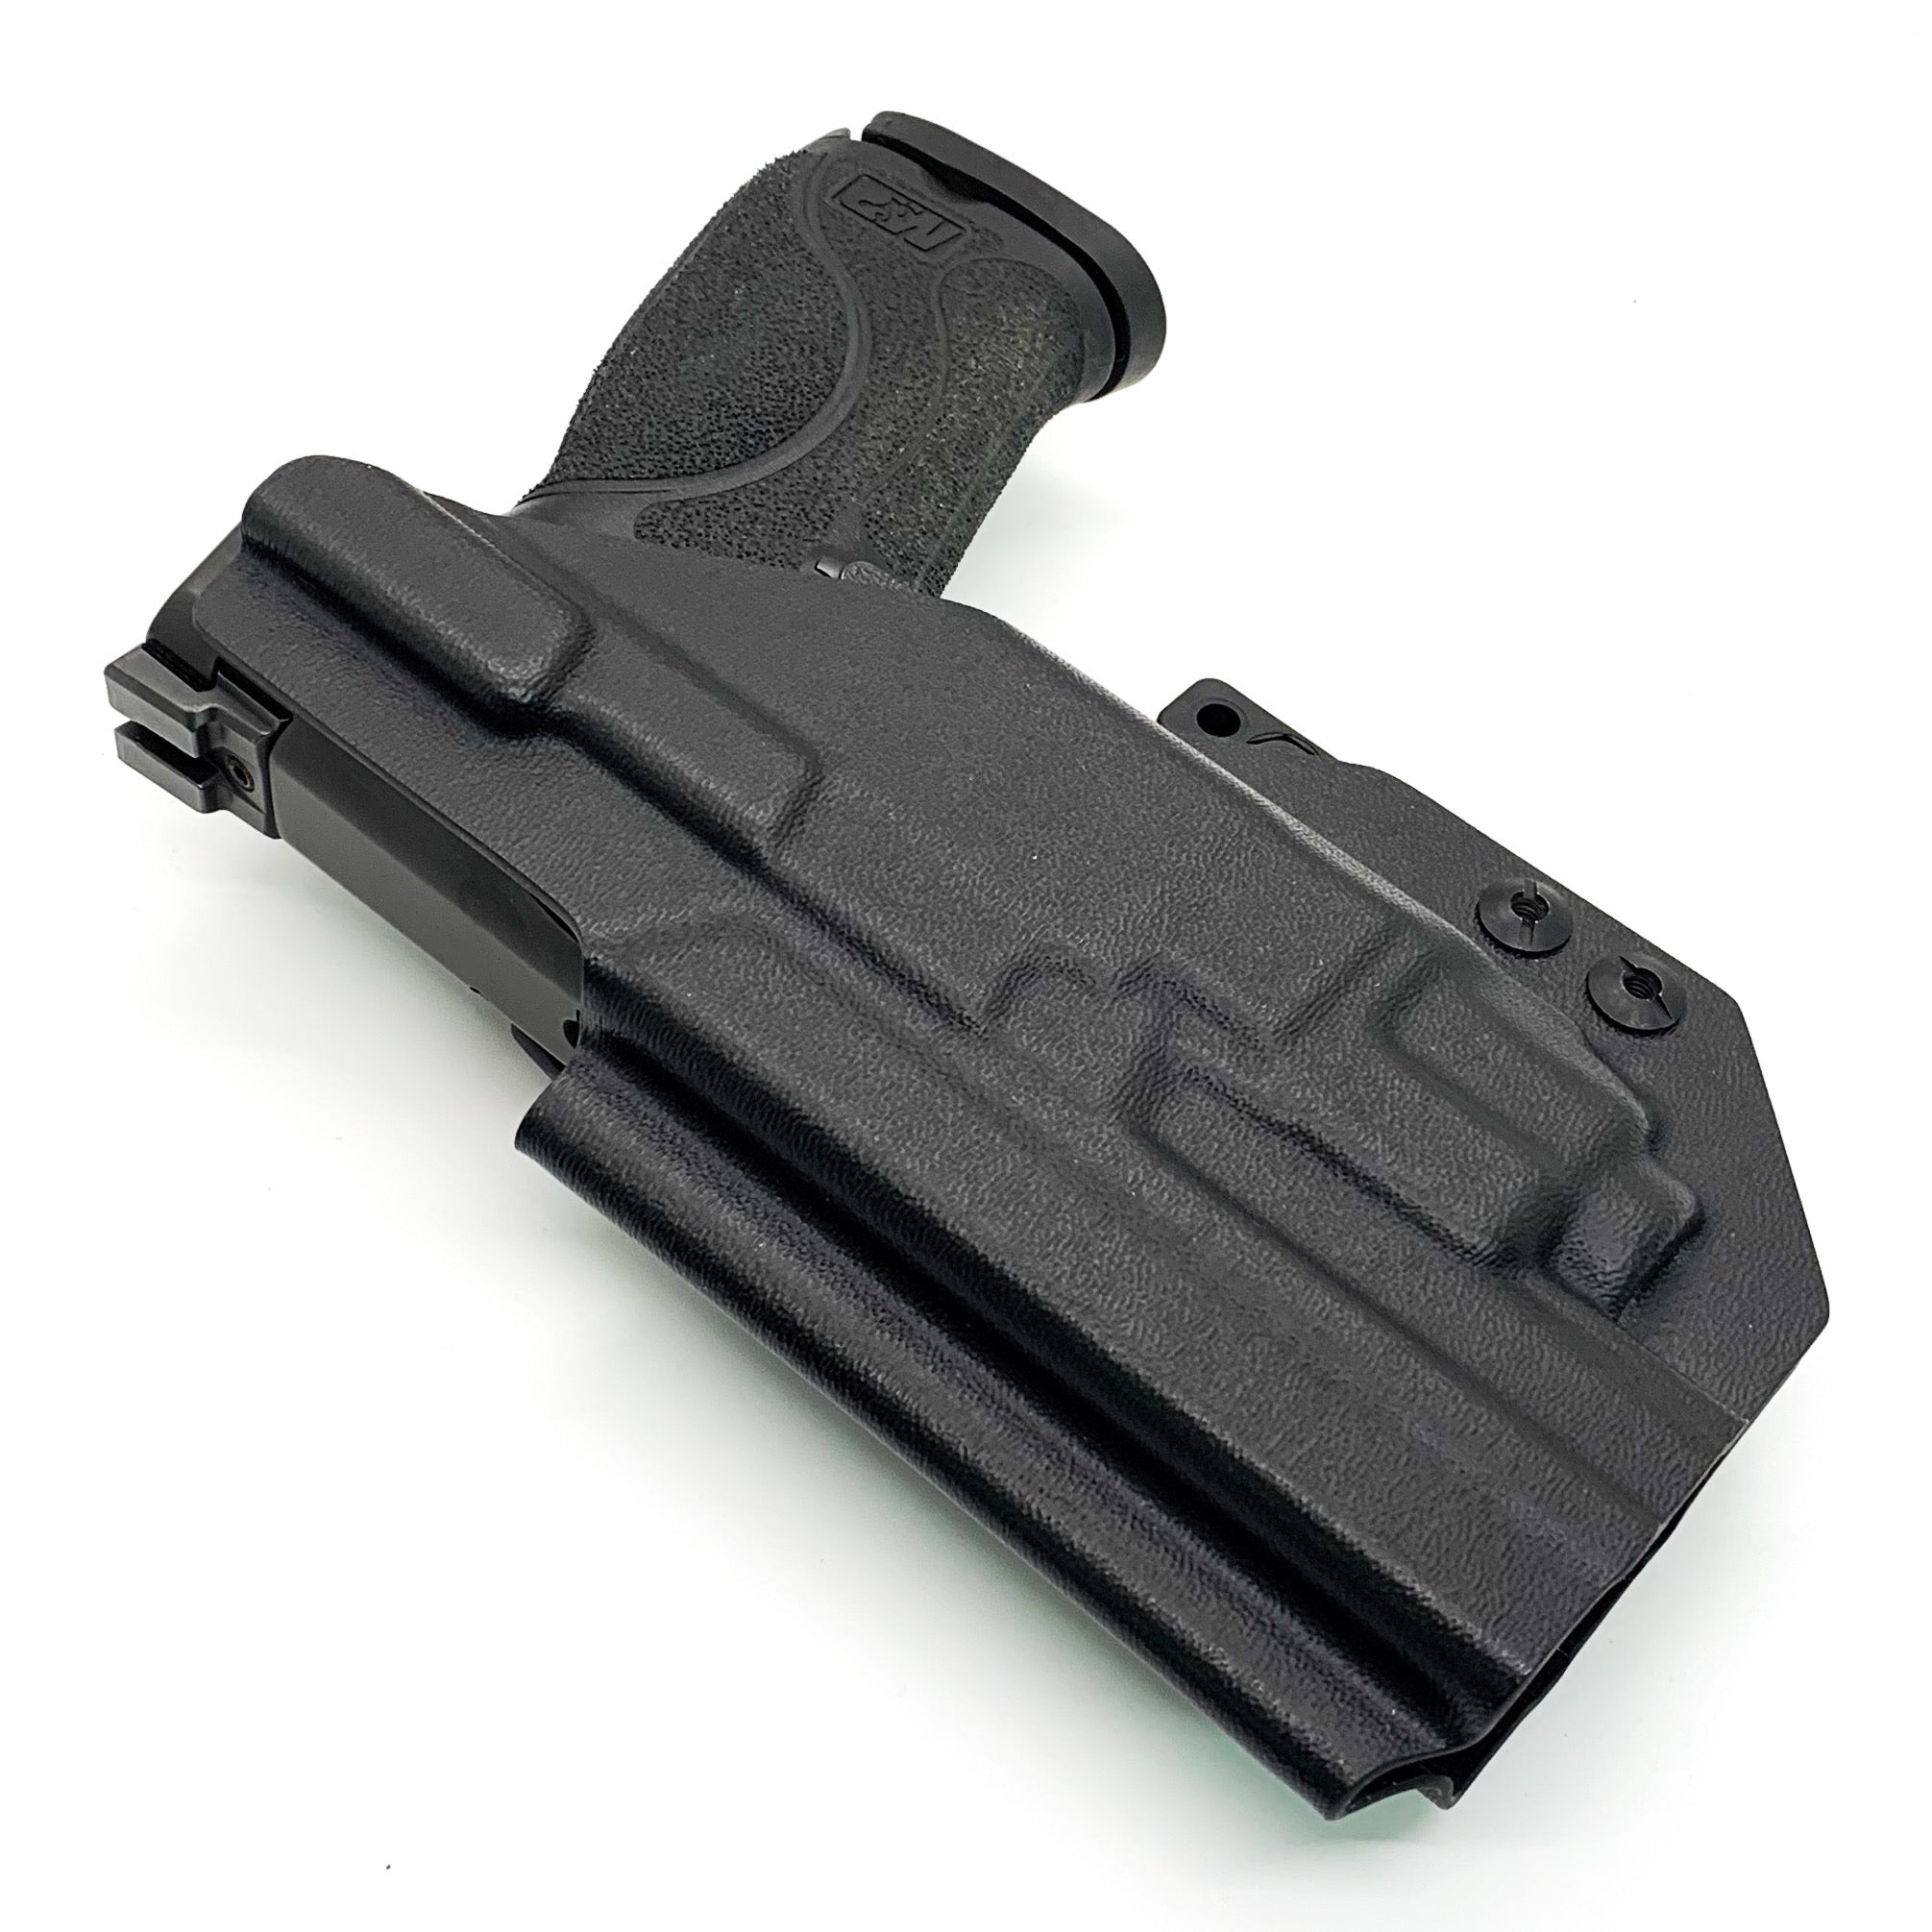 Best Inside Waistband IWB AIWB Kydex Holster designed to fit the Smith & Wesson M&P M2.0  9mm 4.25" pistols with the Streamlight TLR-8 or TLR-8A light mounted to the pistol. Full sweat guard, adjustable retention, minimal material, & smooth edges to reduce printing. Cleared for red dot sights. Proudly made in the USA. 